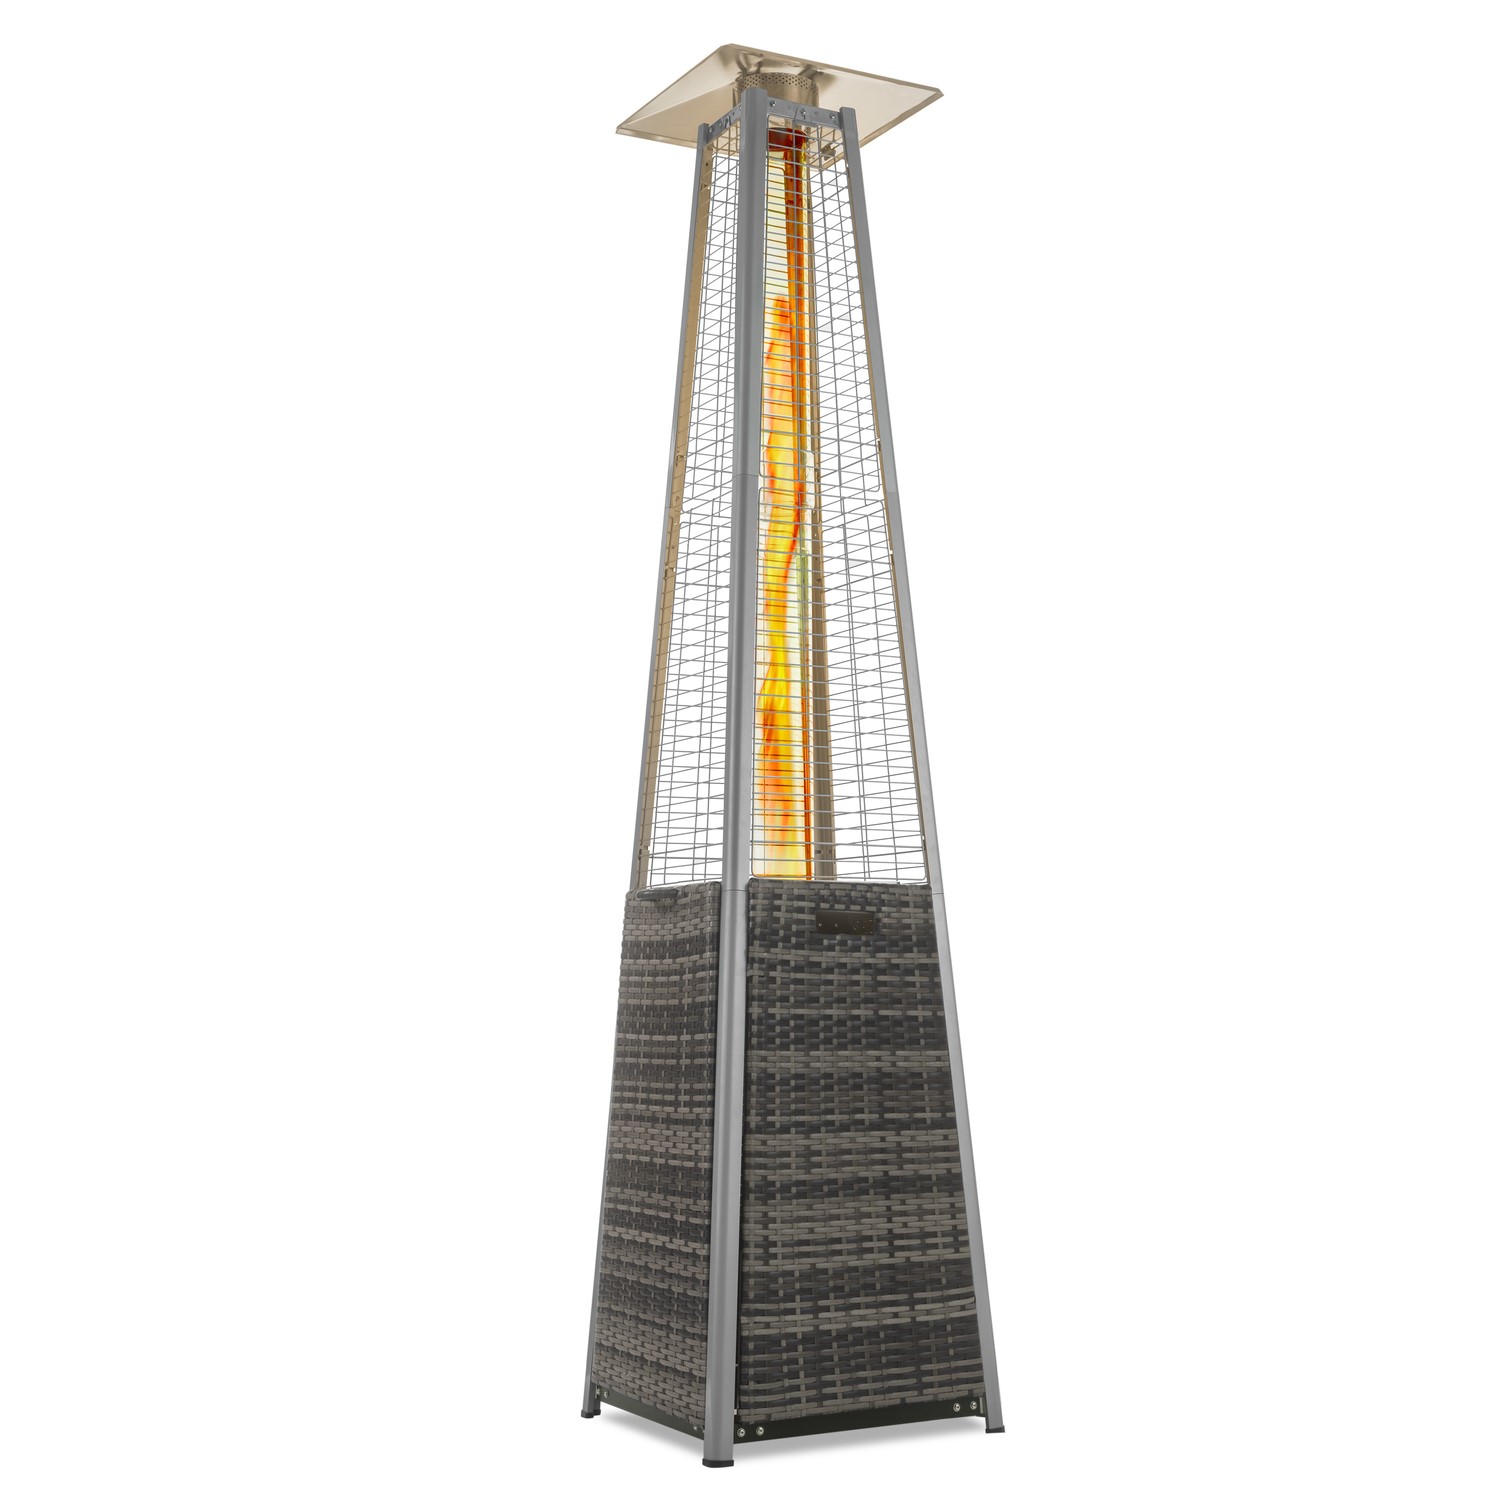 Refurbished electriQ EQODHFLGR Flame Tower Outdoor Gas Patio Heater